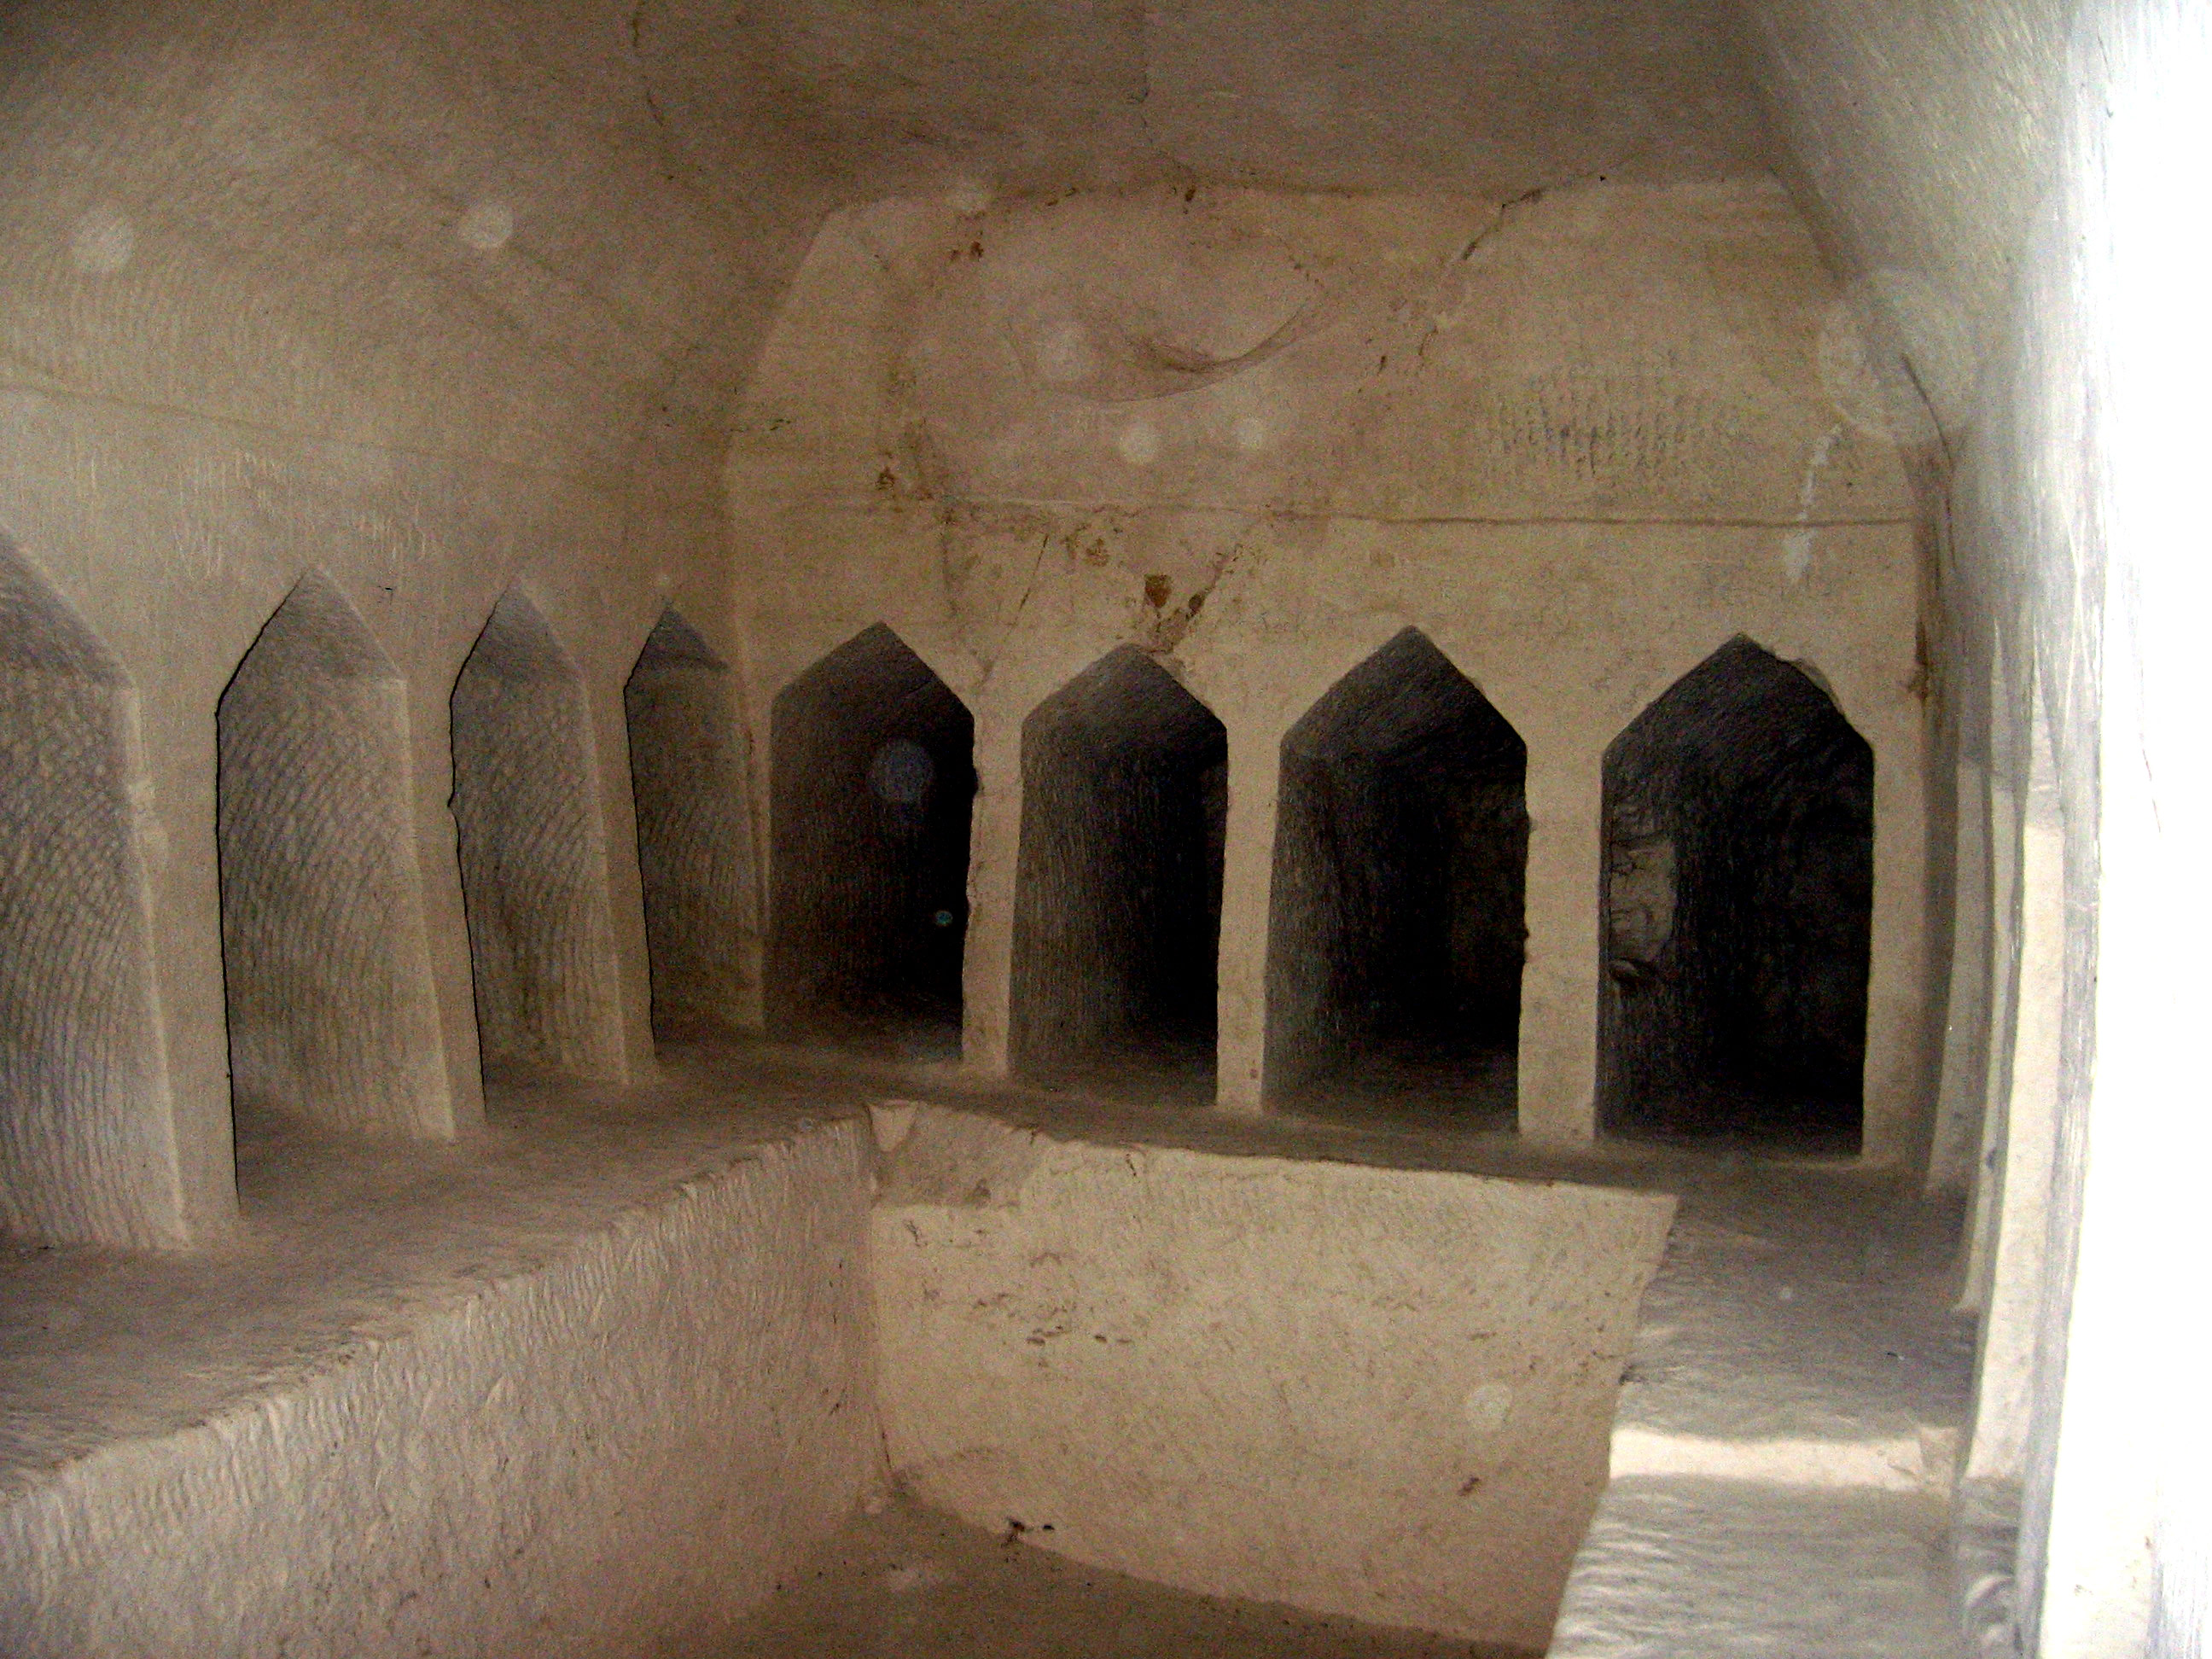 Sidonian Tomb from 200 BC in Mareshah, or Beit-Guvrin